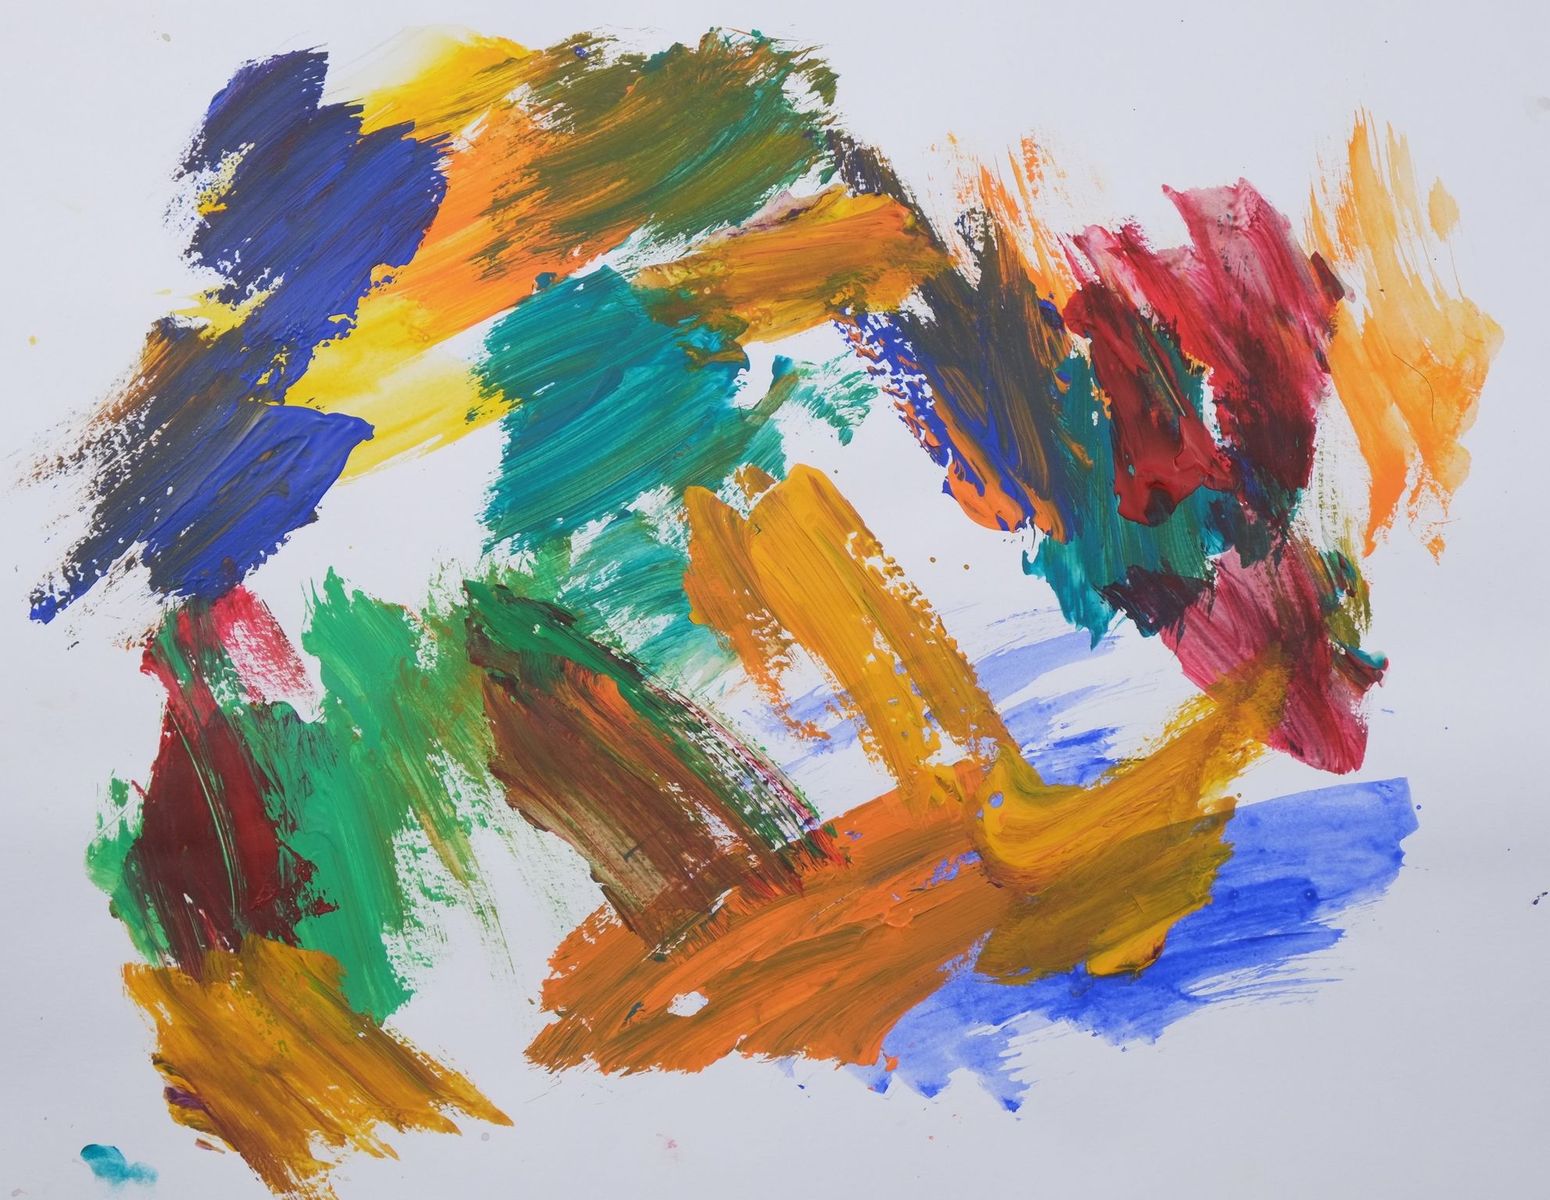 Acrylic on paper artwork against a white background with loose paint strokes of blue, orange, teal, green, yellow and red